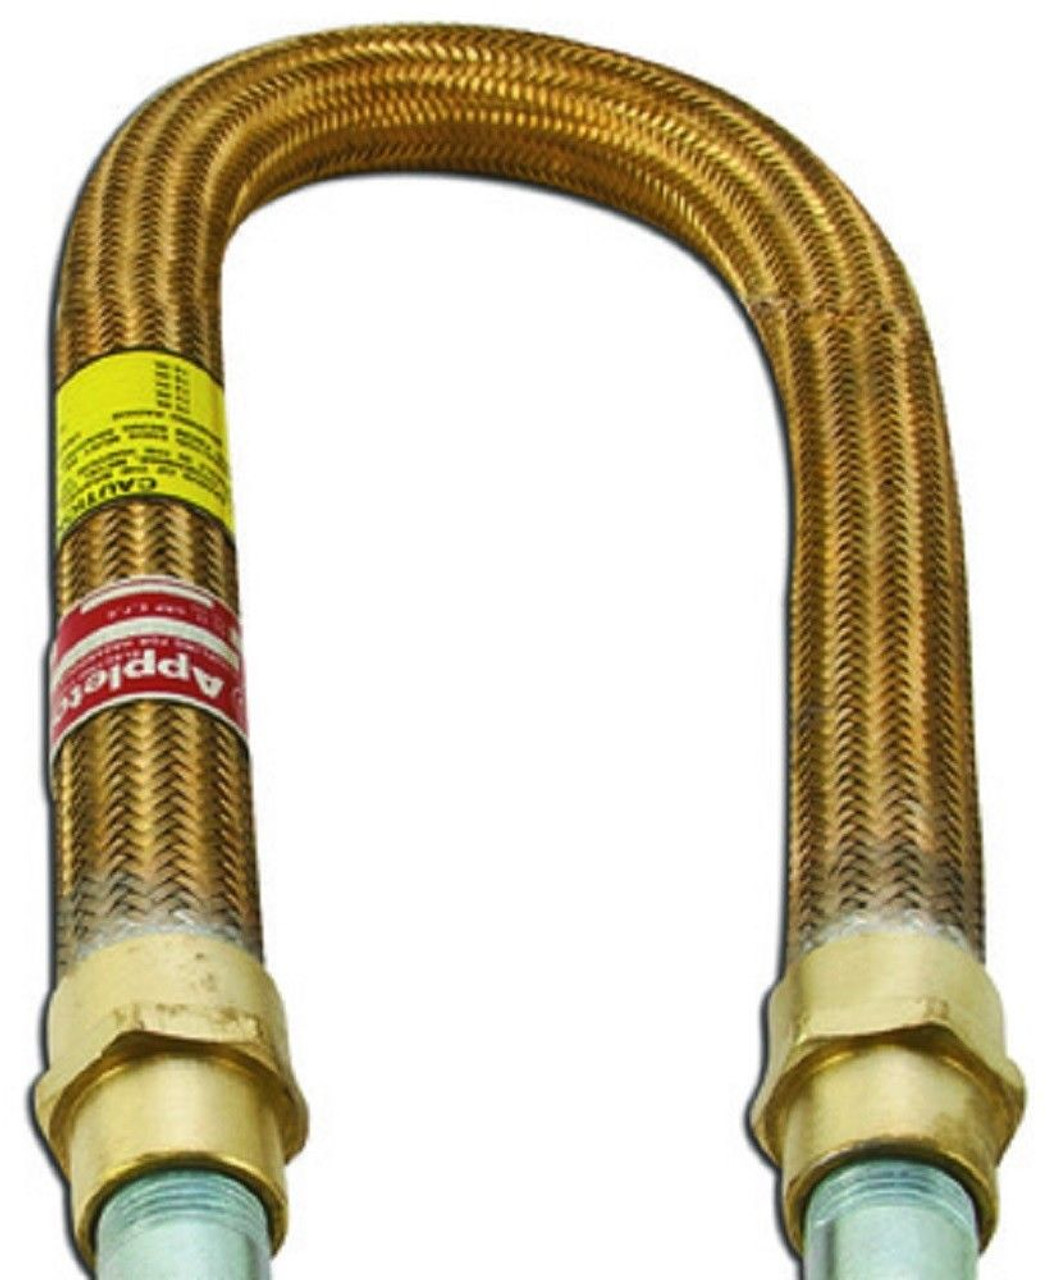 Appleton EXGJH-112 Explosionproof Flexible Coupling, Dust-Ignitionproof, 12" L [New]